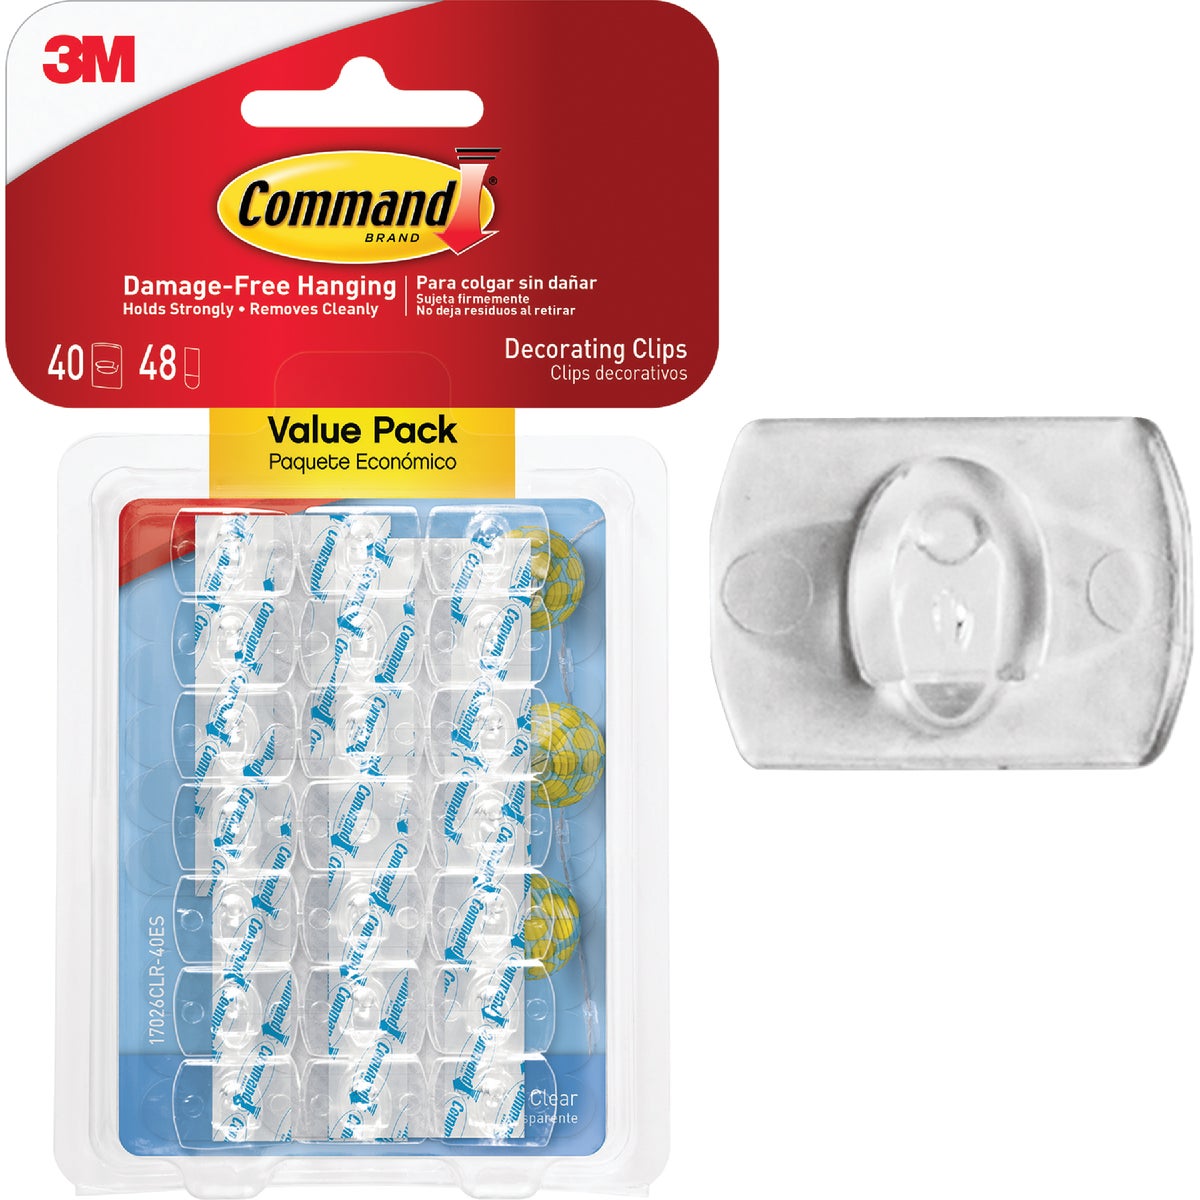 Item 241090, Forget about nails, screws and tacks, Command Clear Hooks are fast and easy